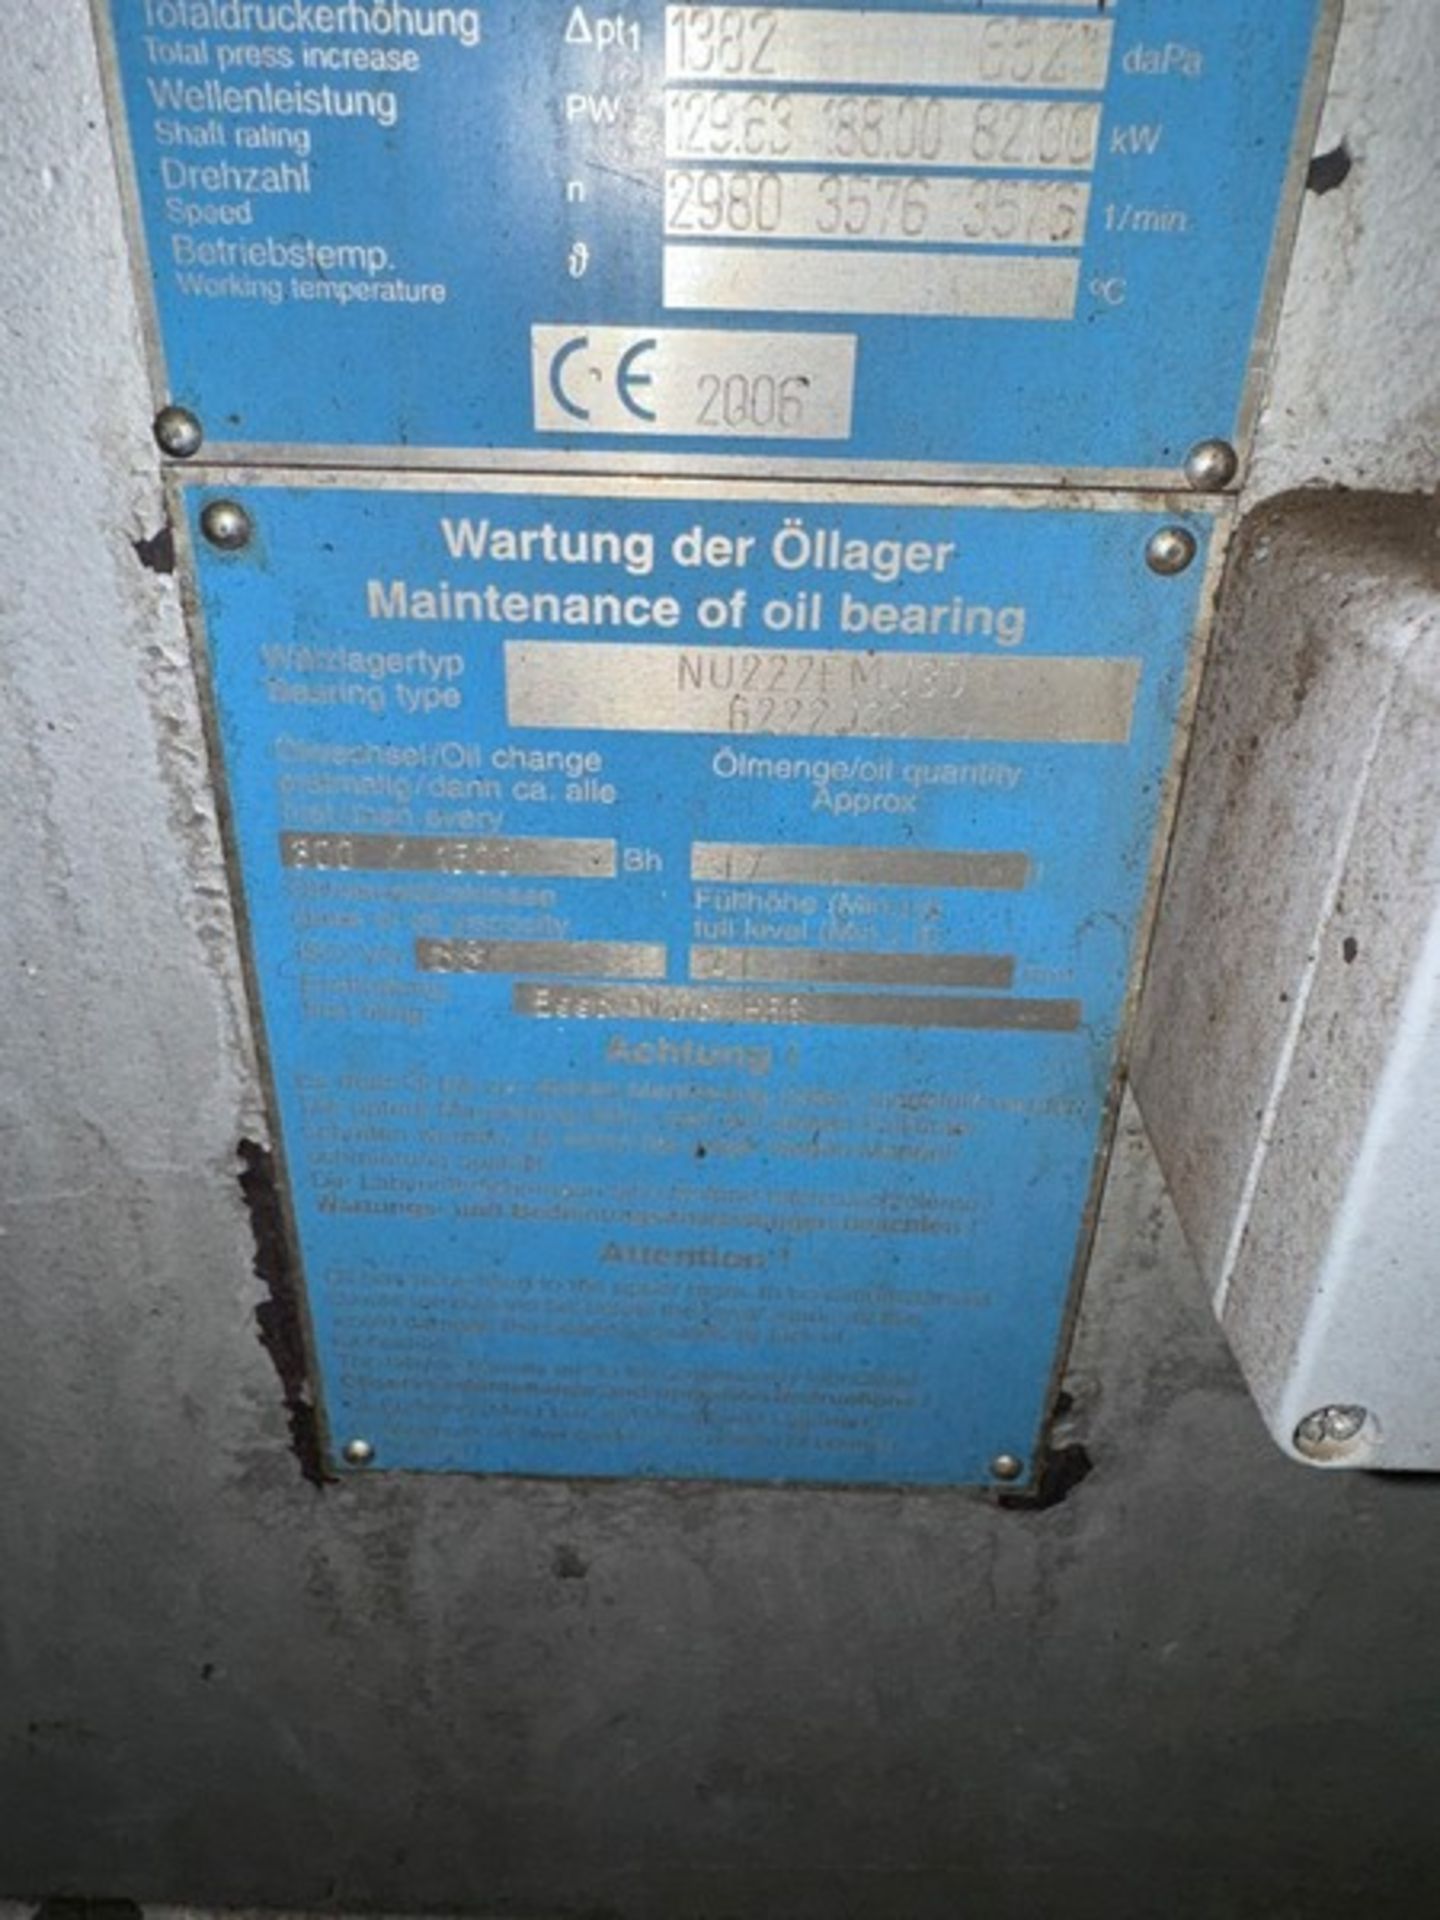 2006 Wartung der Öllager 160 kw Radial Hot Fan, Type: KXE 160-040030-60, S/N 212397, Includes Square - Image 6 of 15